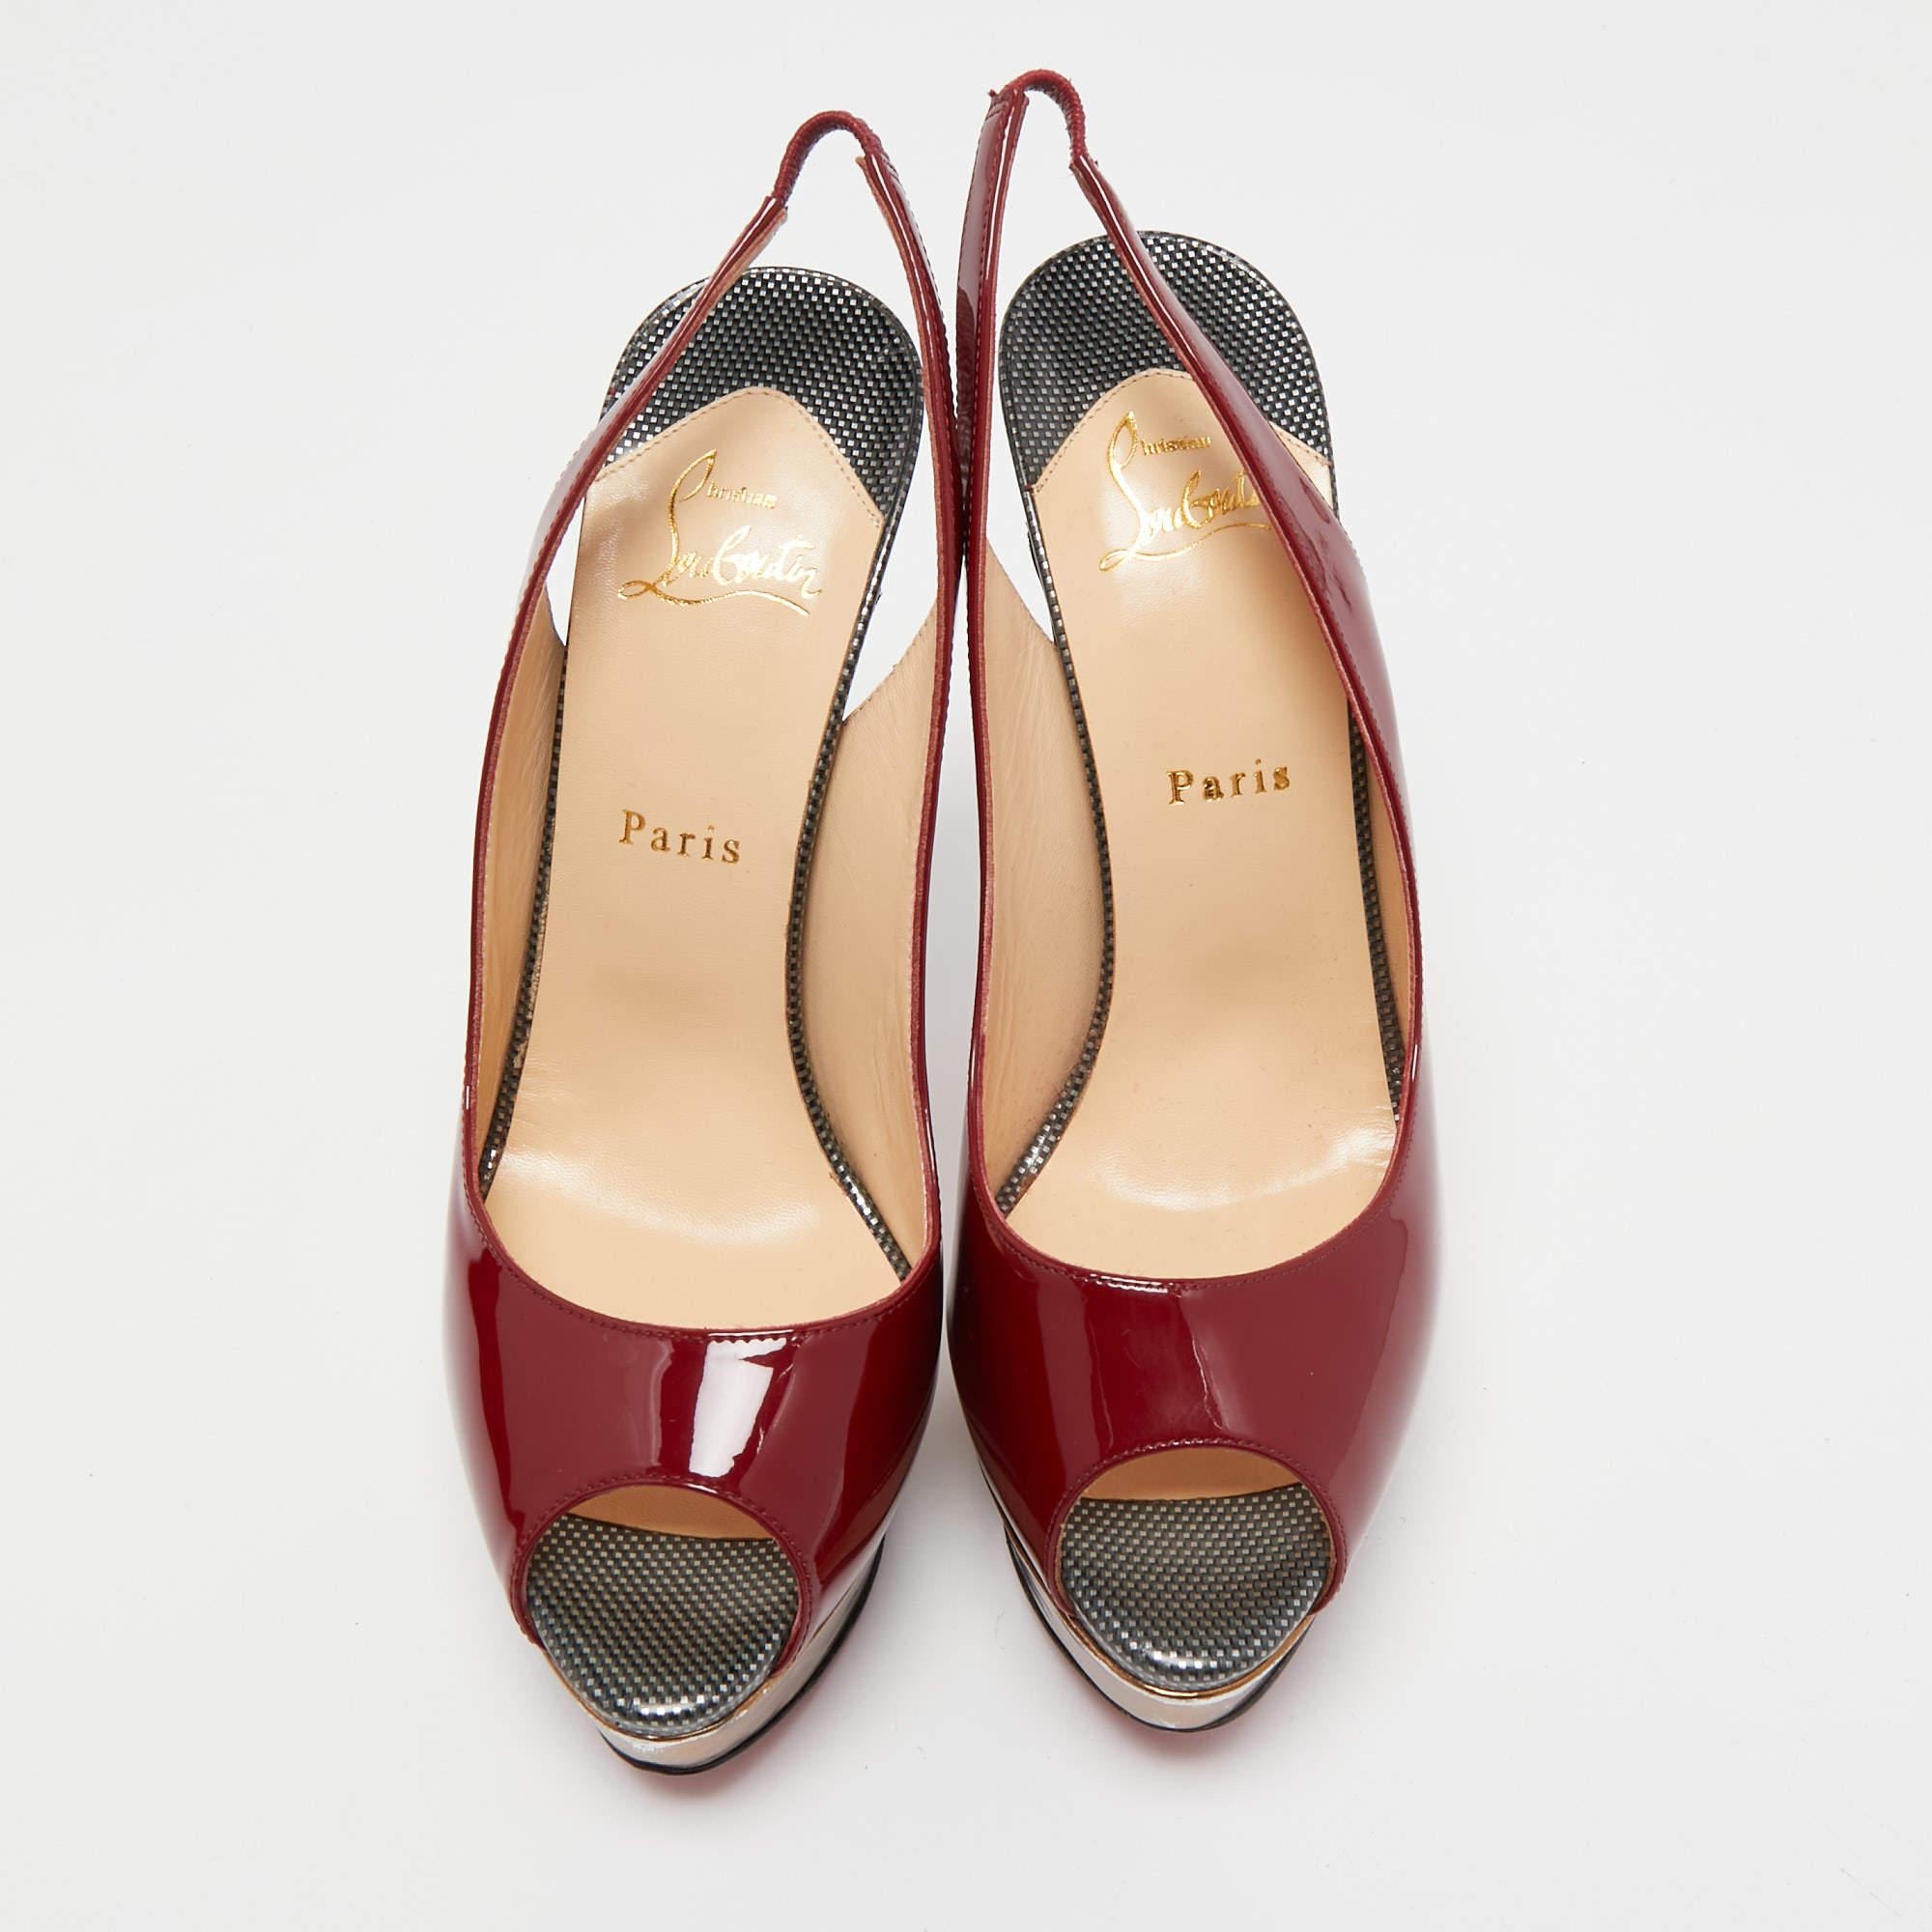 Exhibit an elegant style with this pair of pumps. These designer pumps are crafted from quality materials. They are set on durable soles and high heels.

Includes: Original Dustbag

